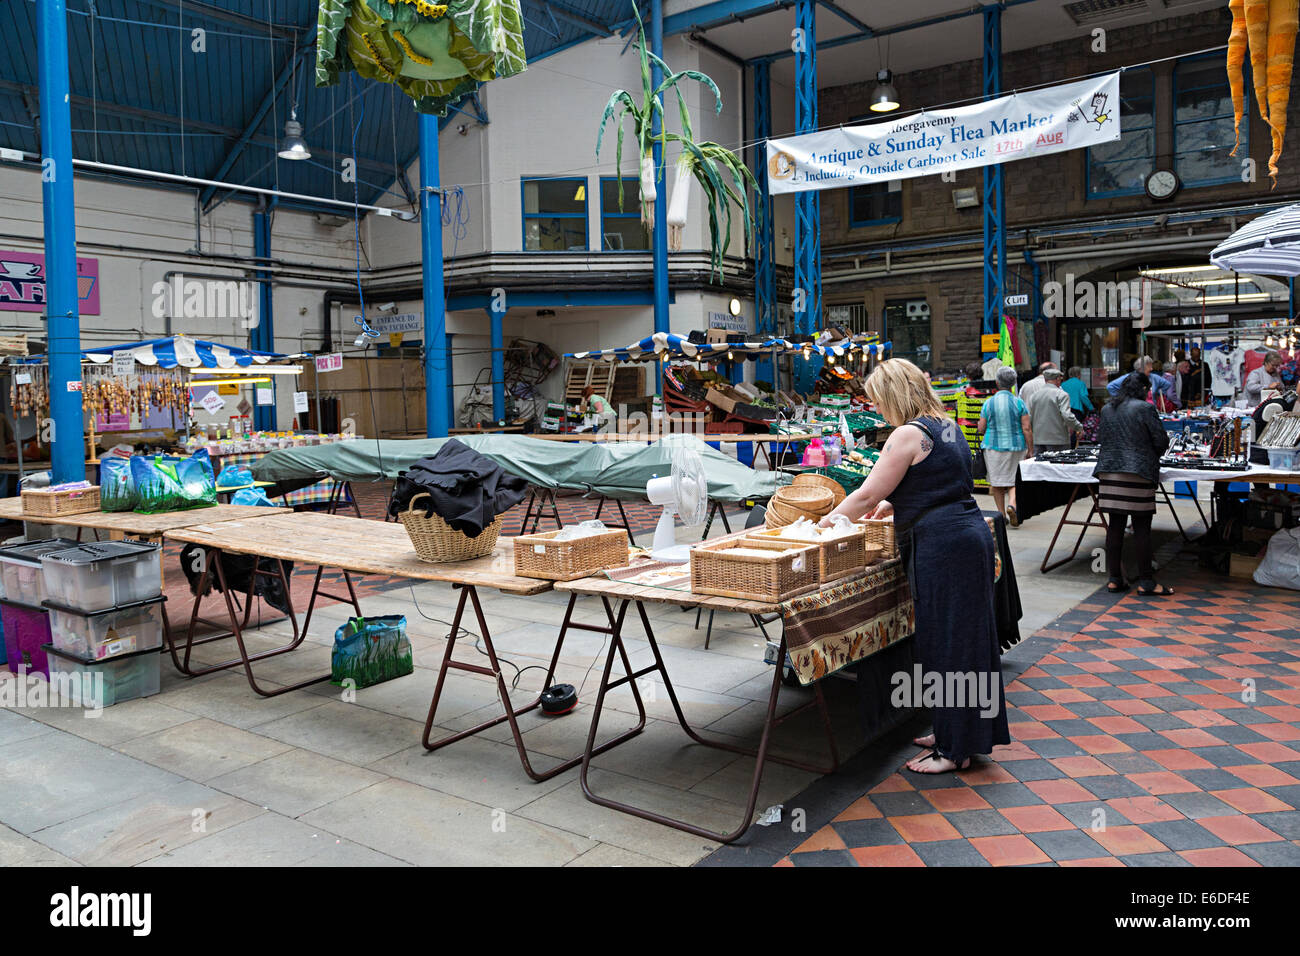 Market traders packing away stalls in indoor market, Abergavenny, Wales, UK Stock Photo